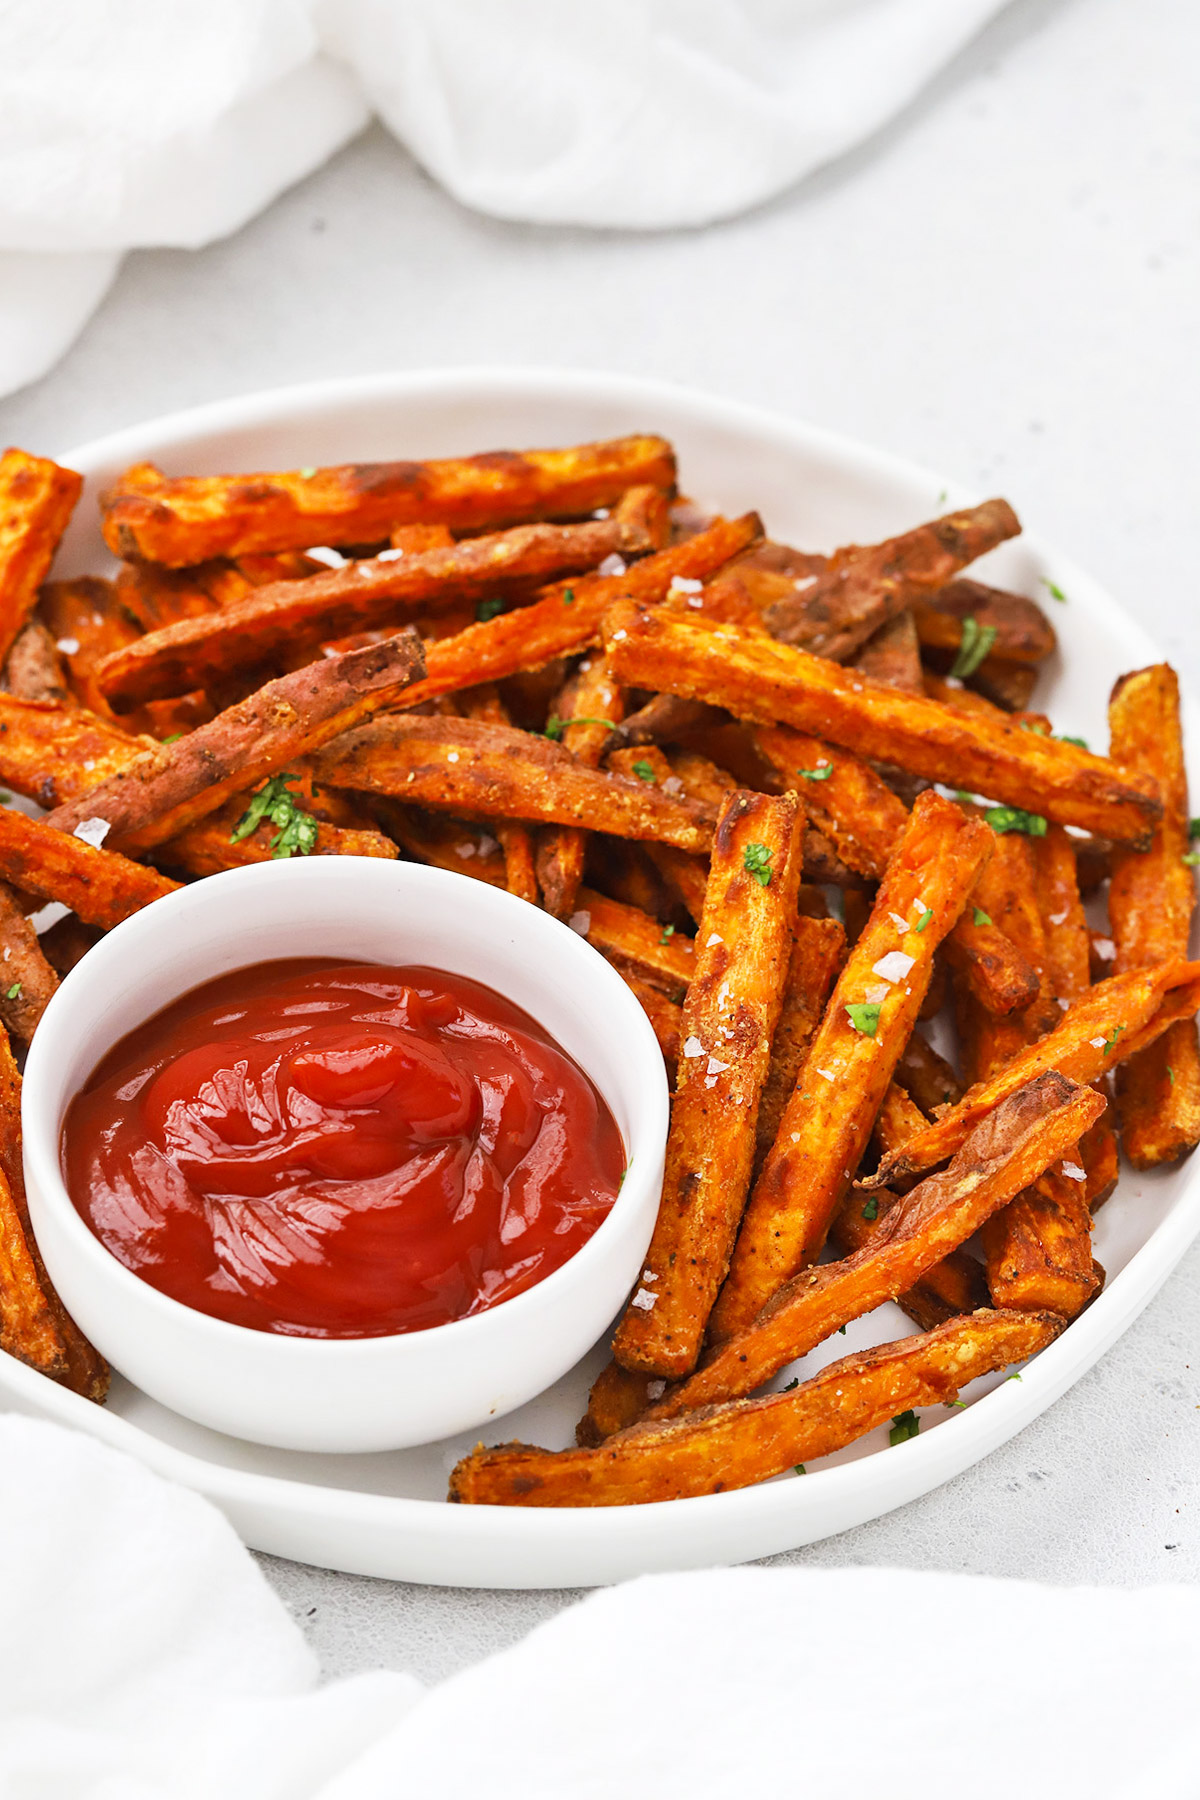 Front view of crispy baked sweet potato fries with ketchup on the side